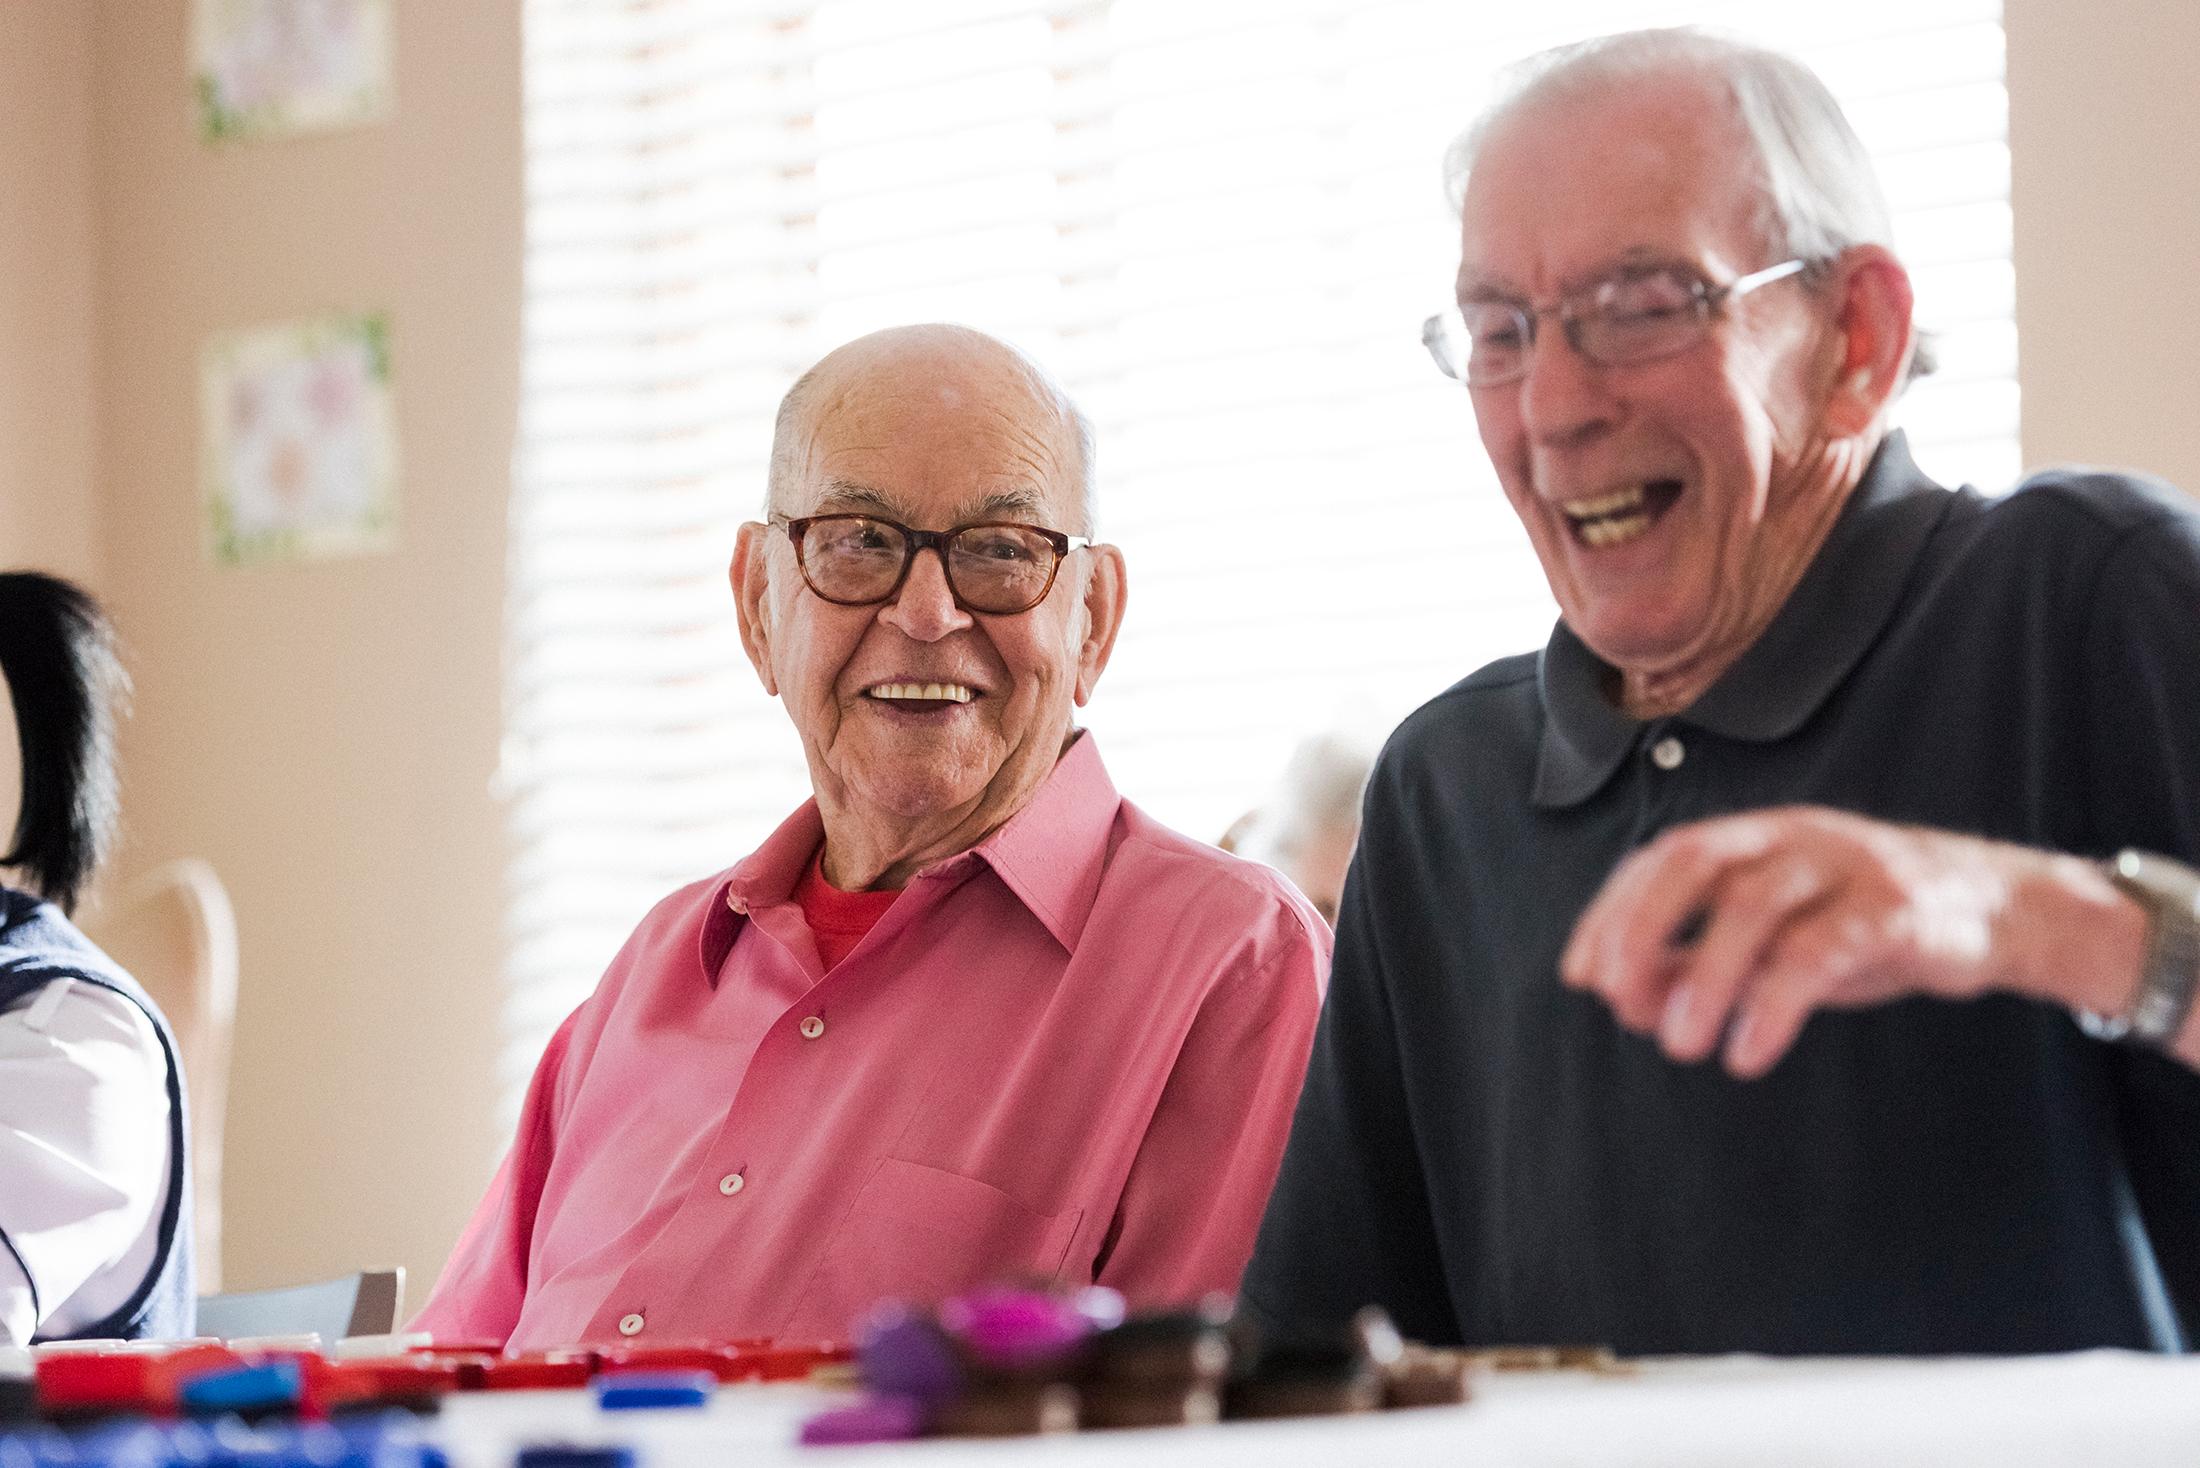 Senior adults playing games together